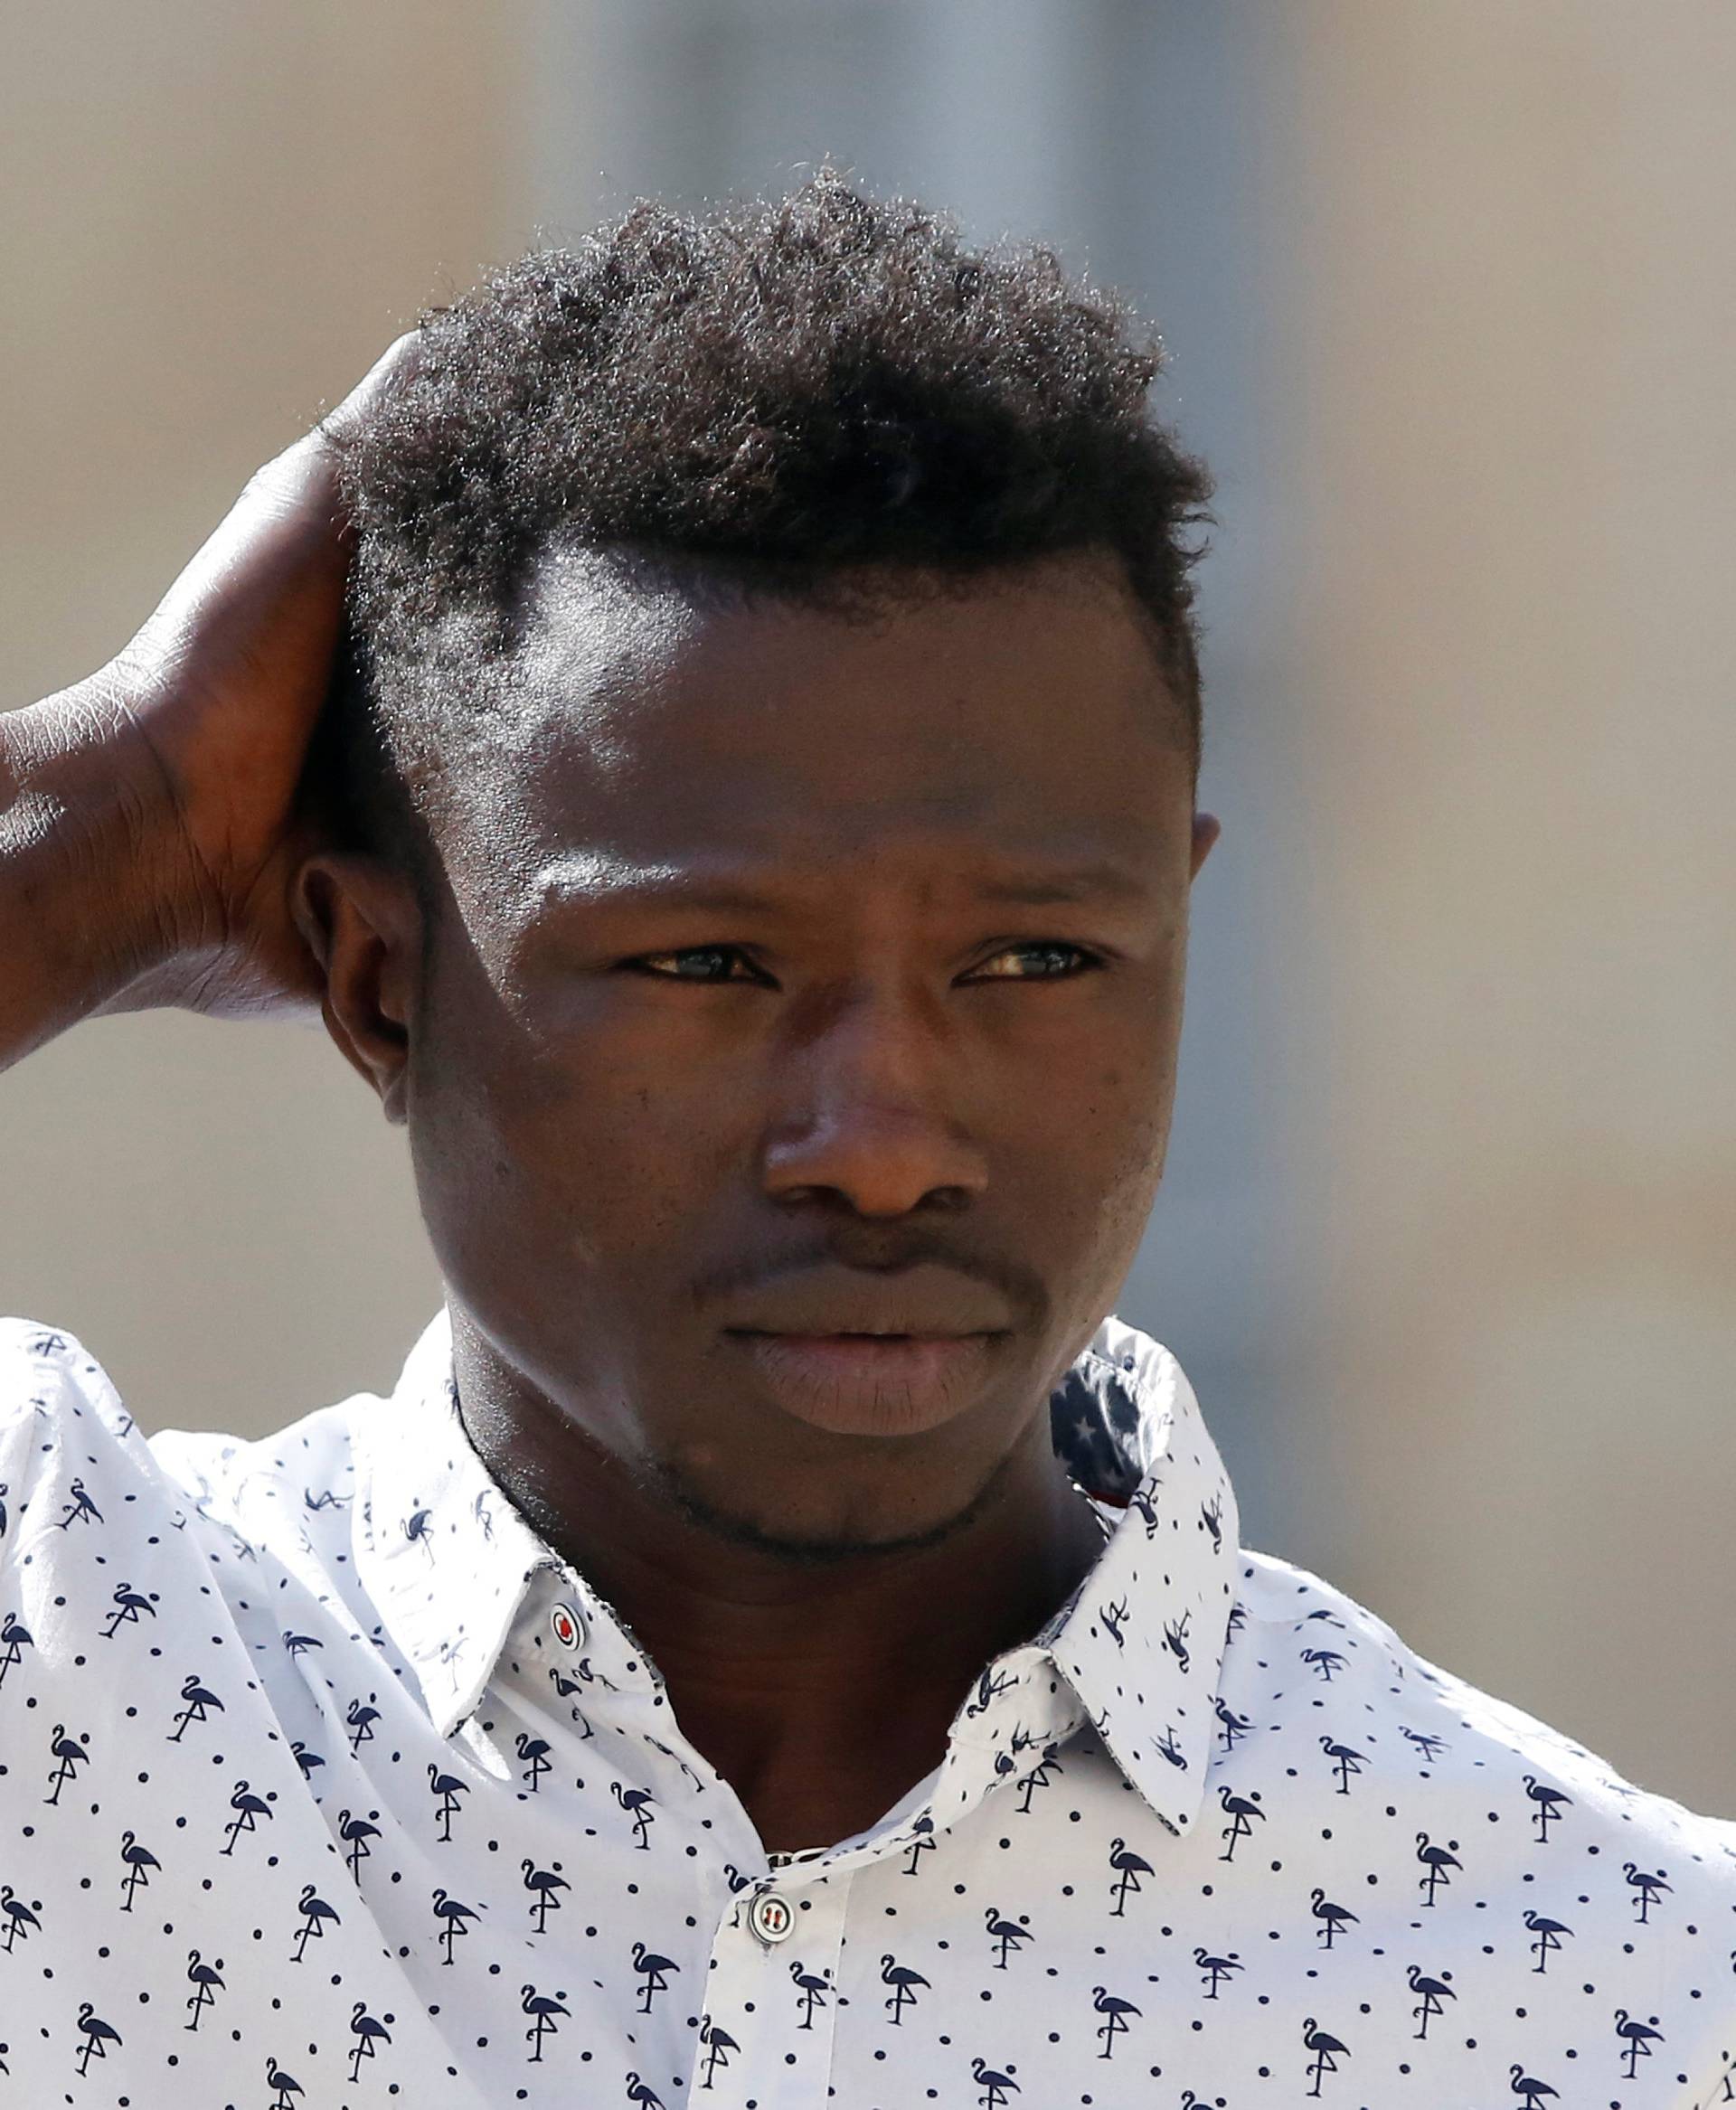 Mamoudou Gassama, 22, from Mali, leaves the Elysee Palace after his meeting with French President Emmanuel Macron, in Paris